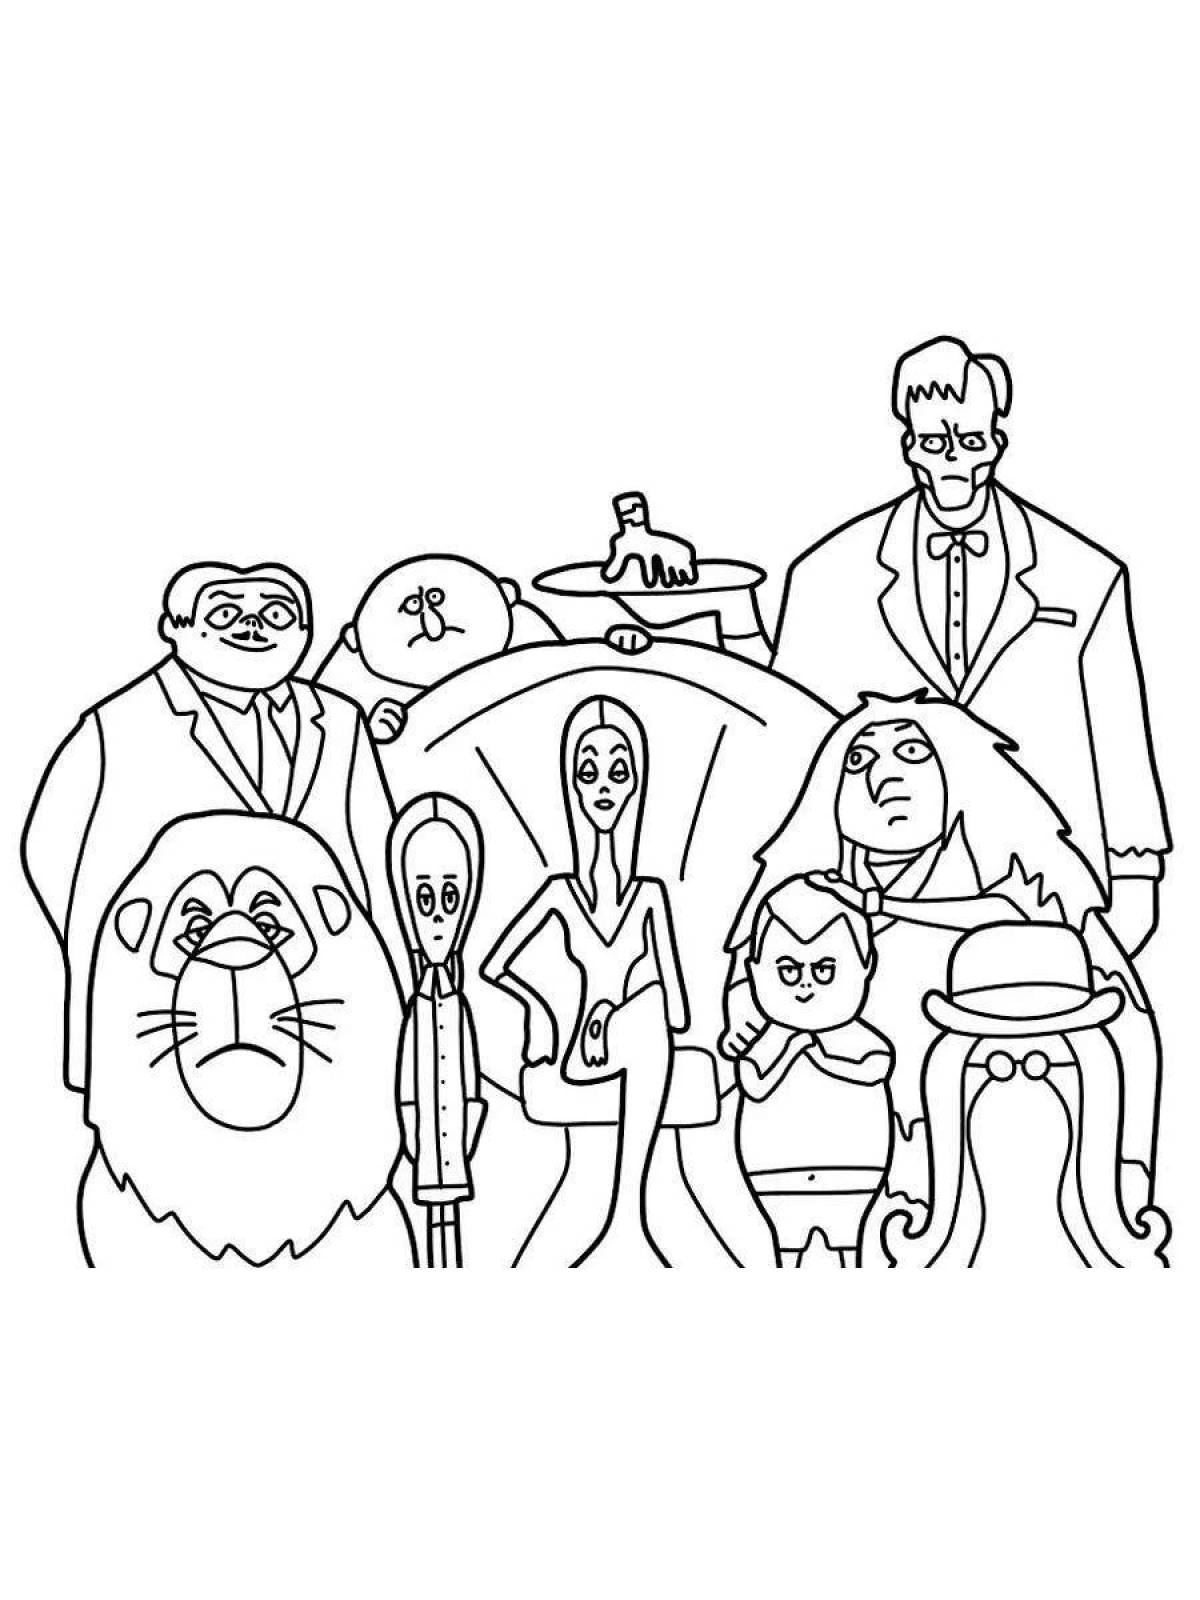 Lively adams family coloring book